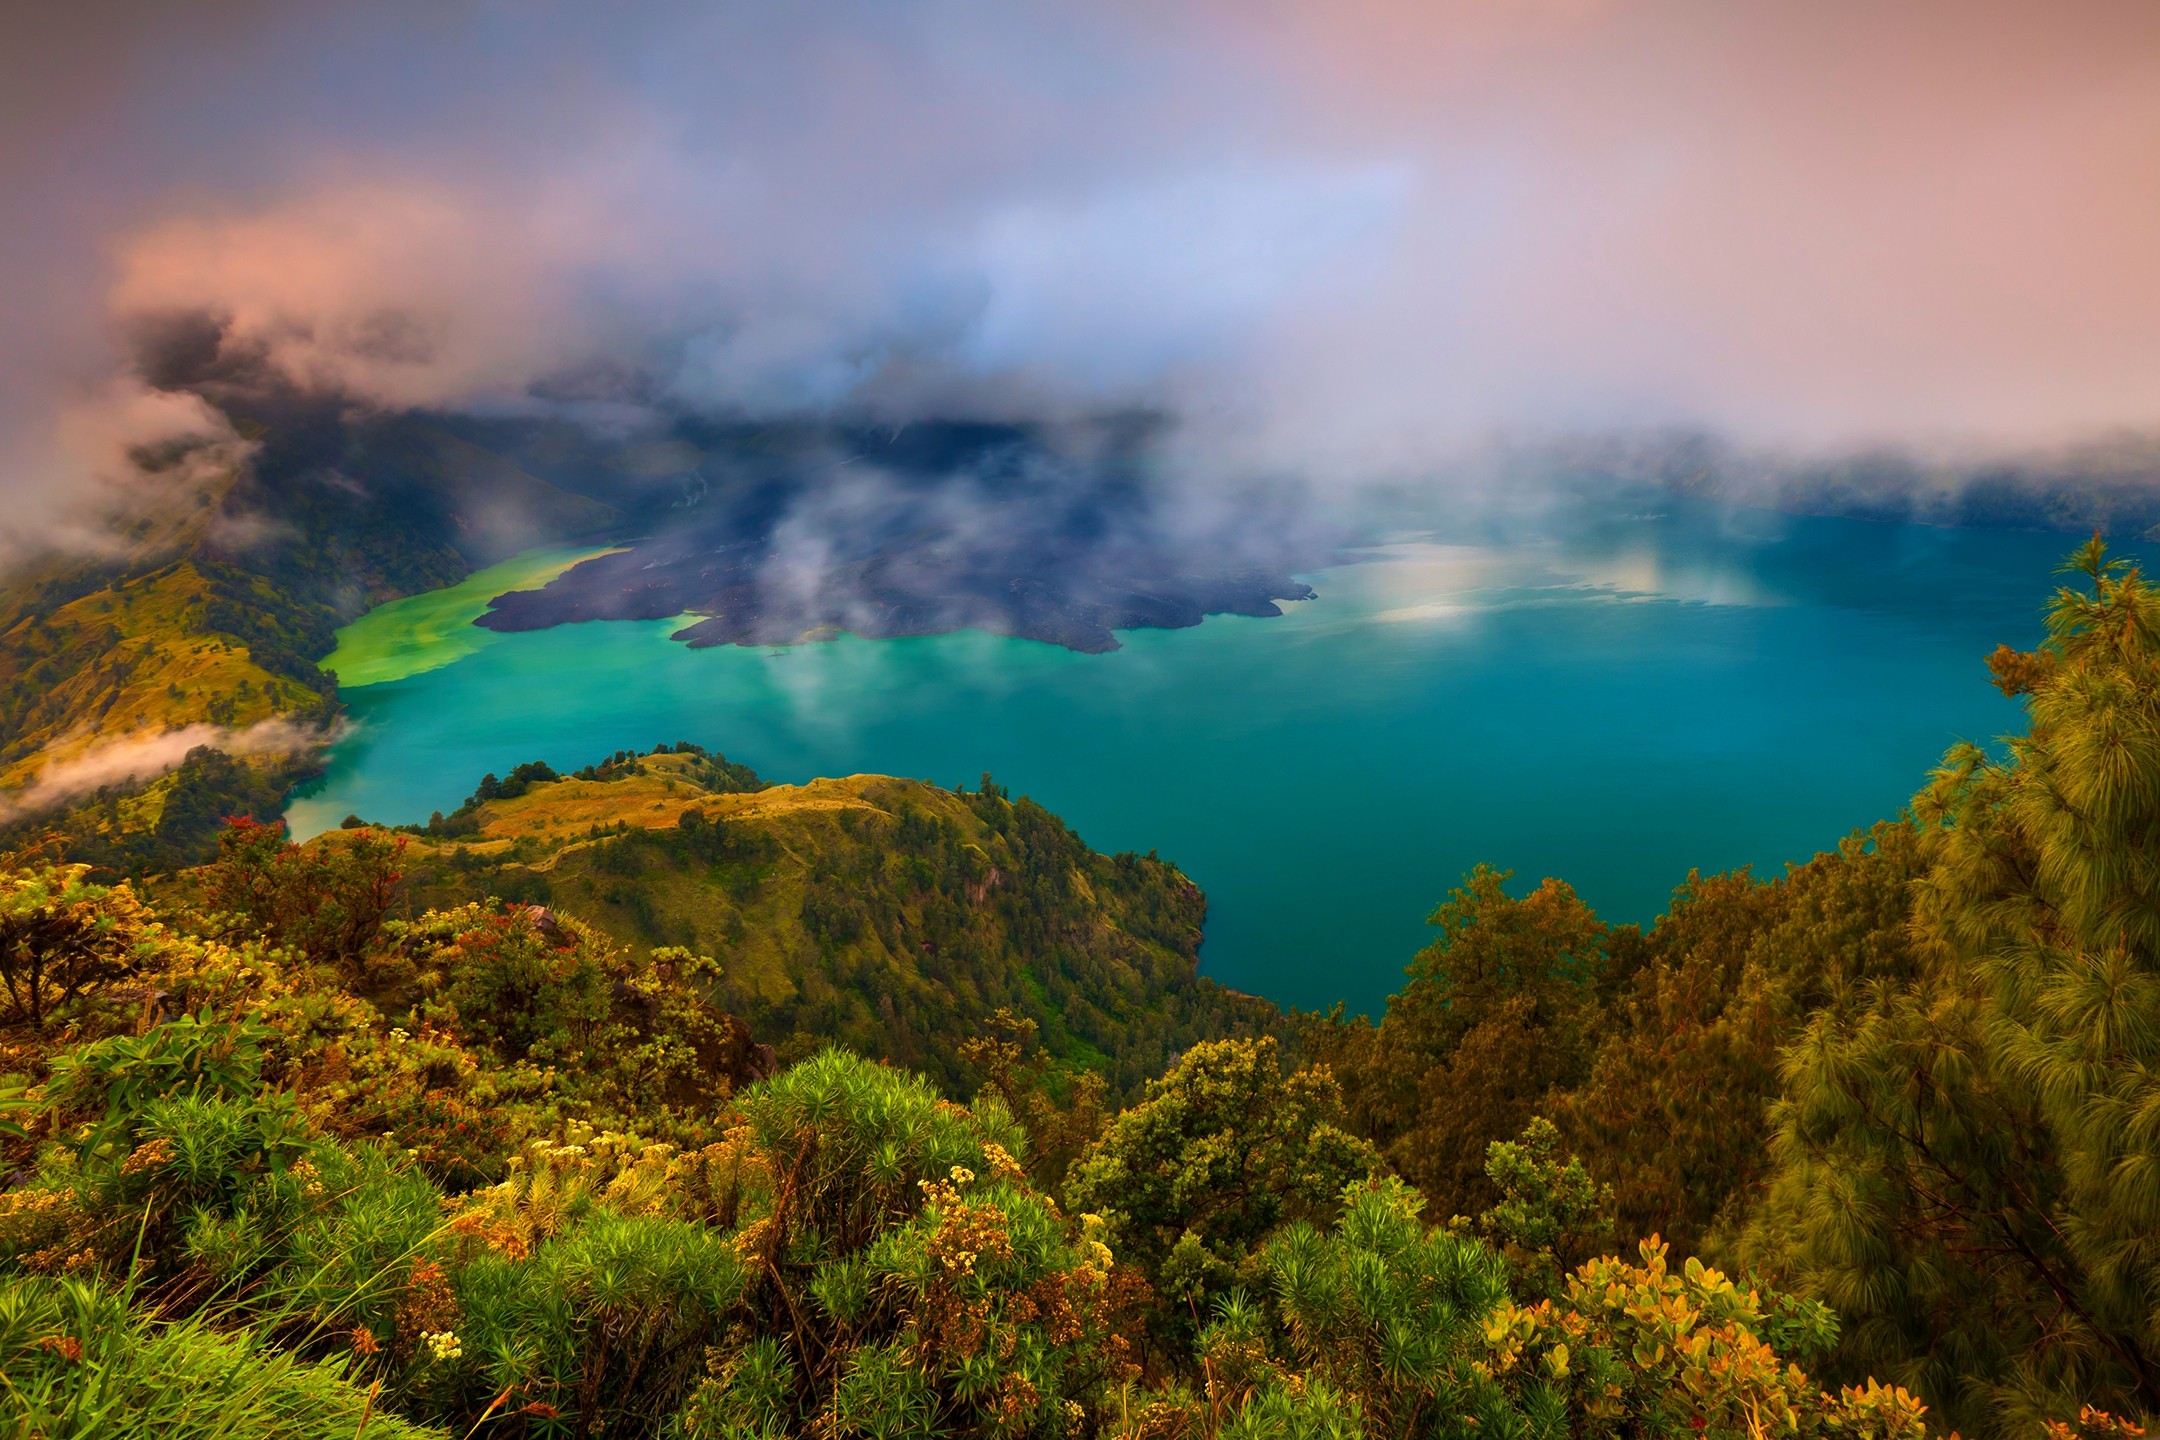 General 2160x1440 landscape nature lake turquoise water forest mountains clouds Indonesia